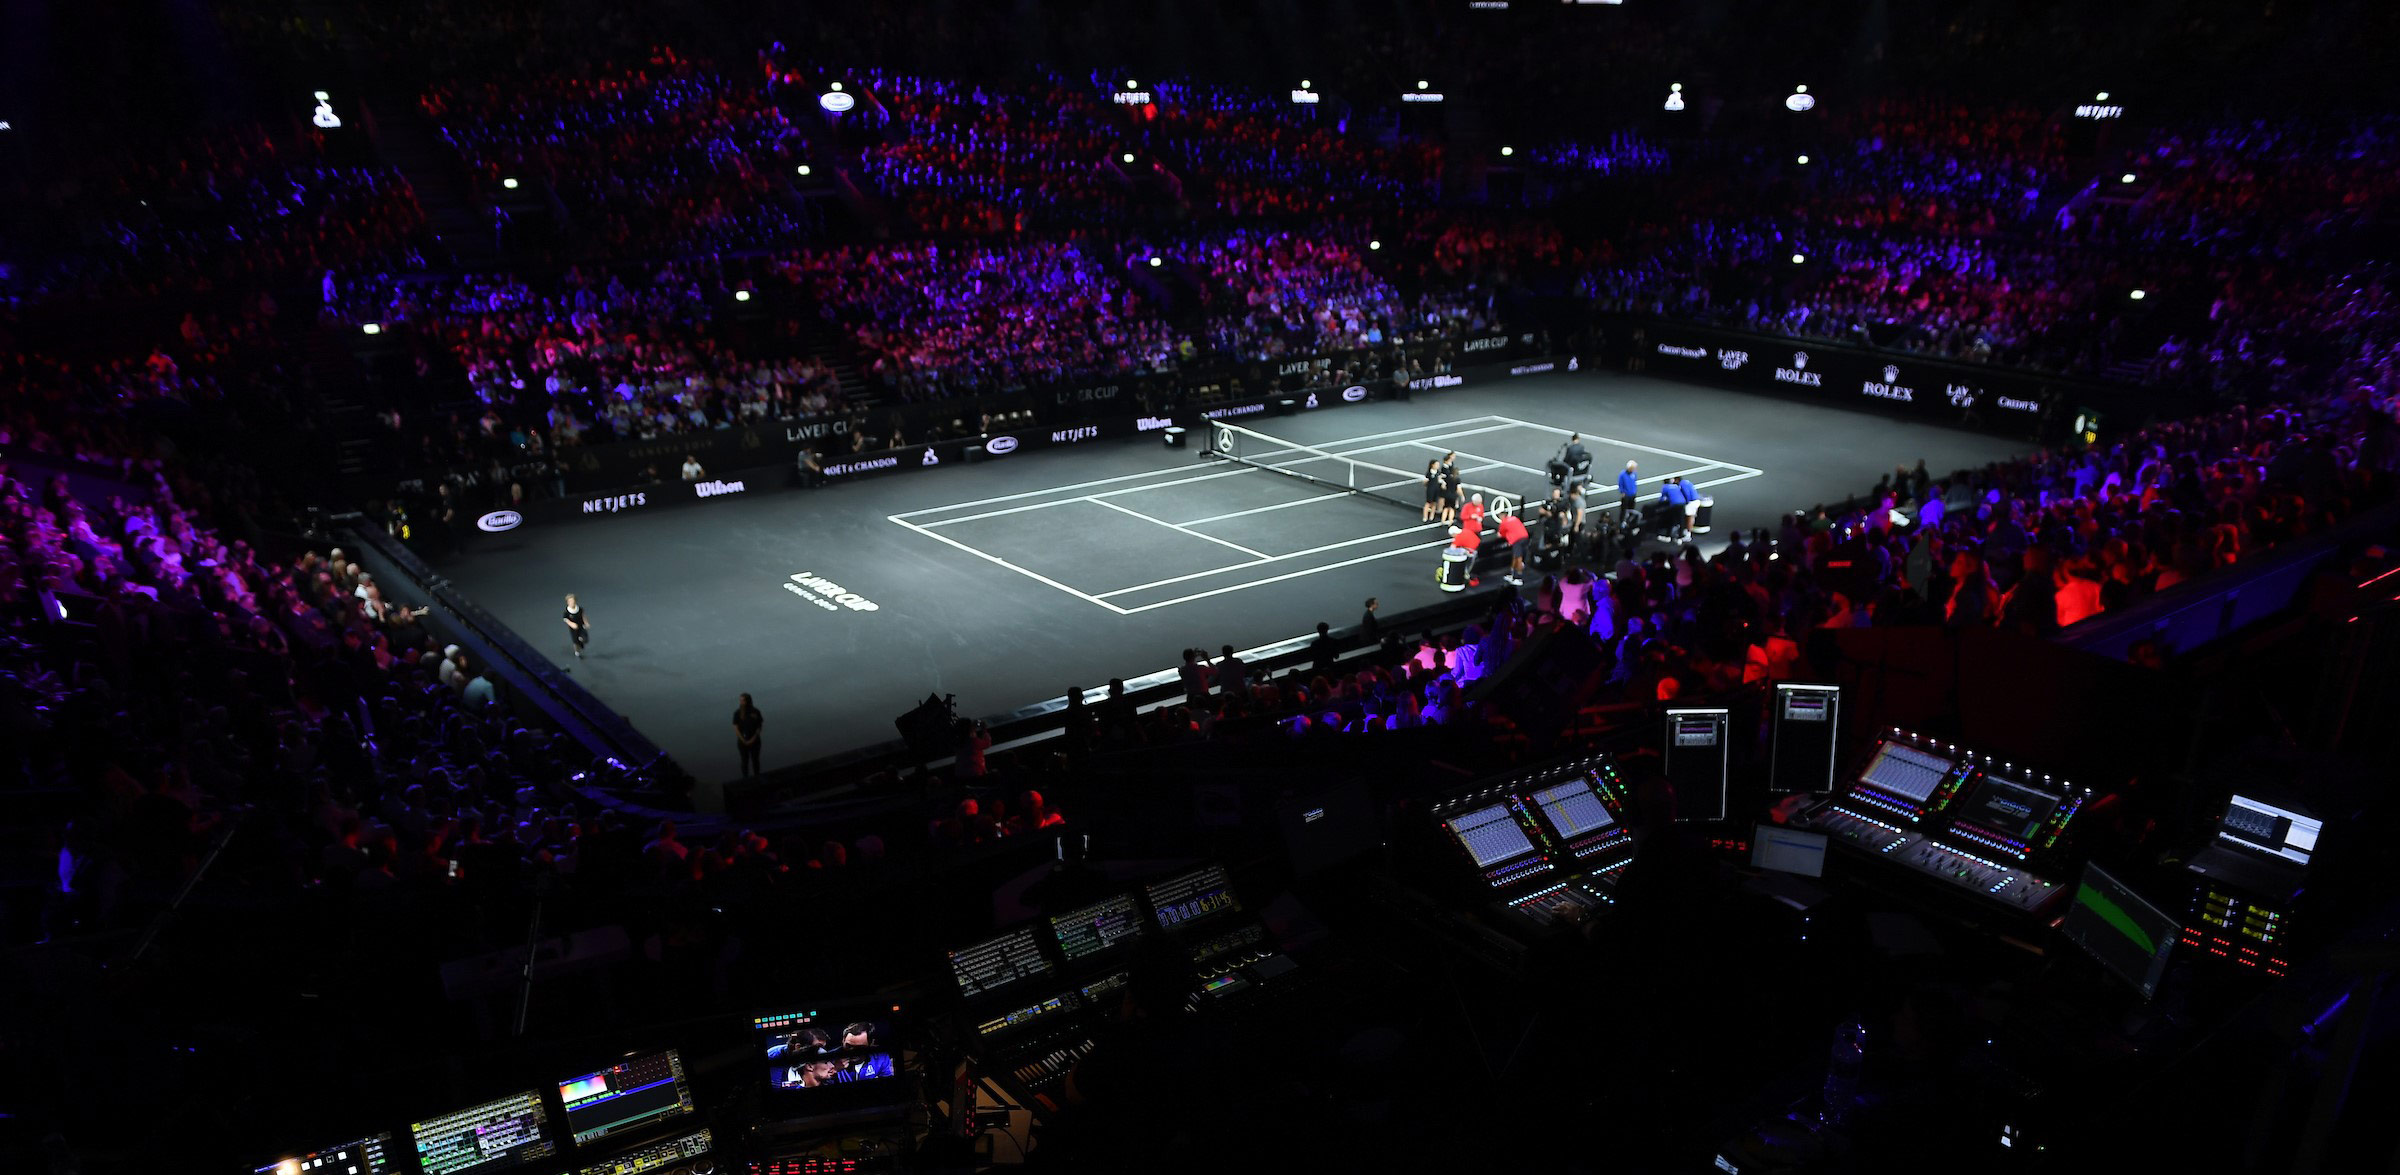 watch laver cup live